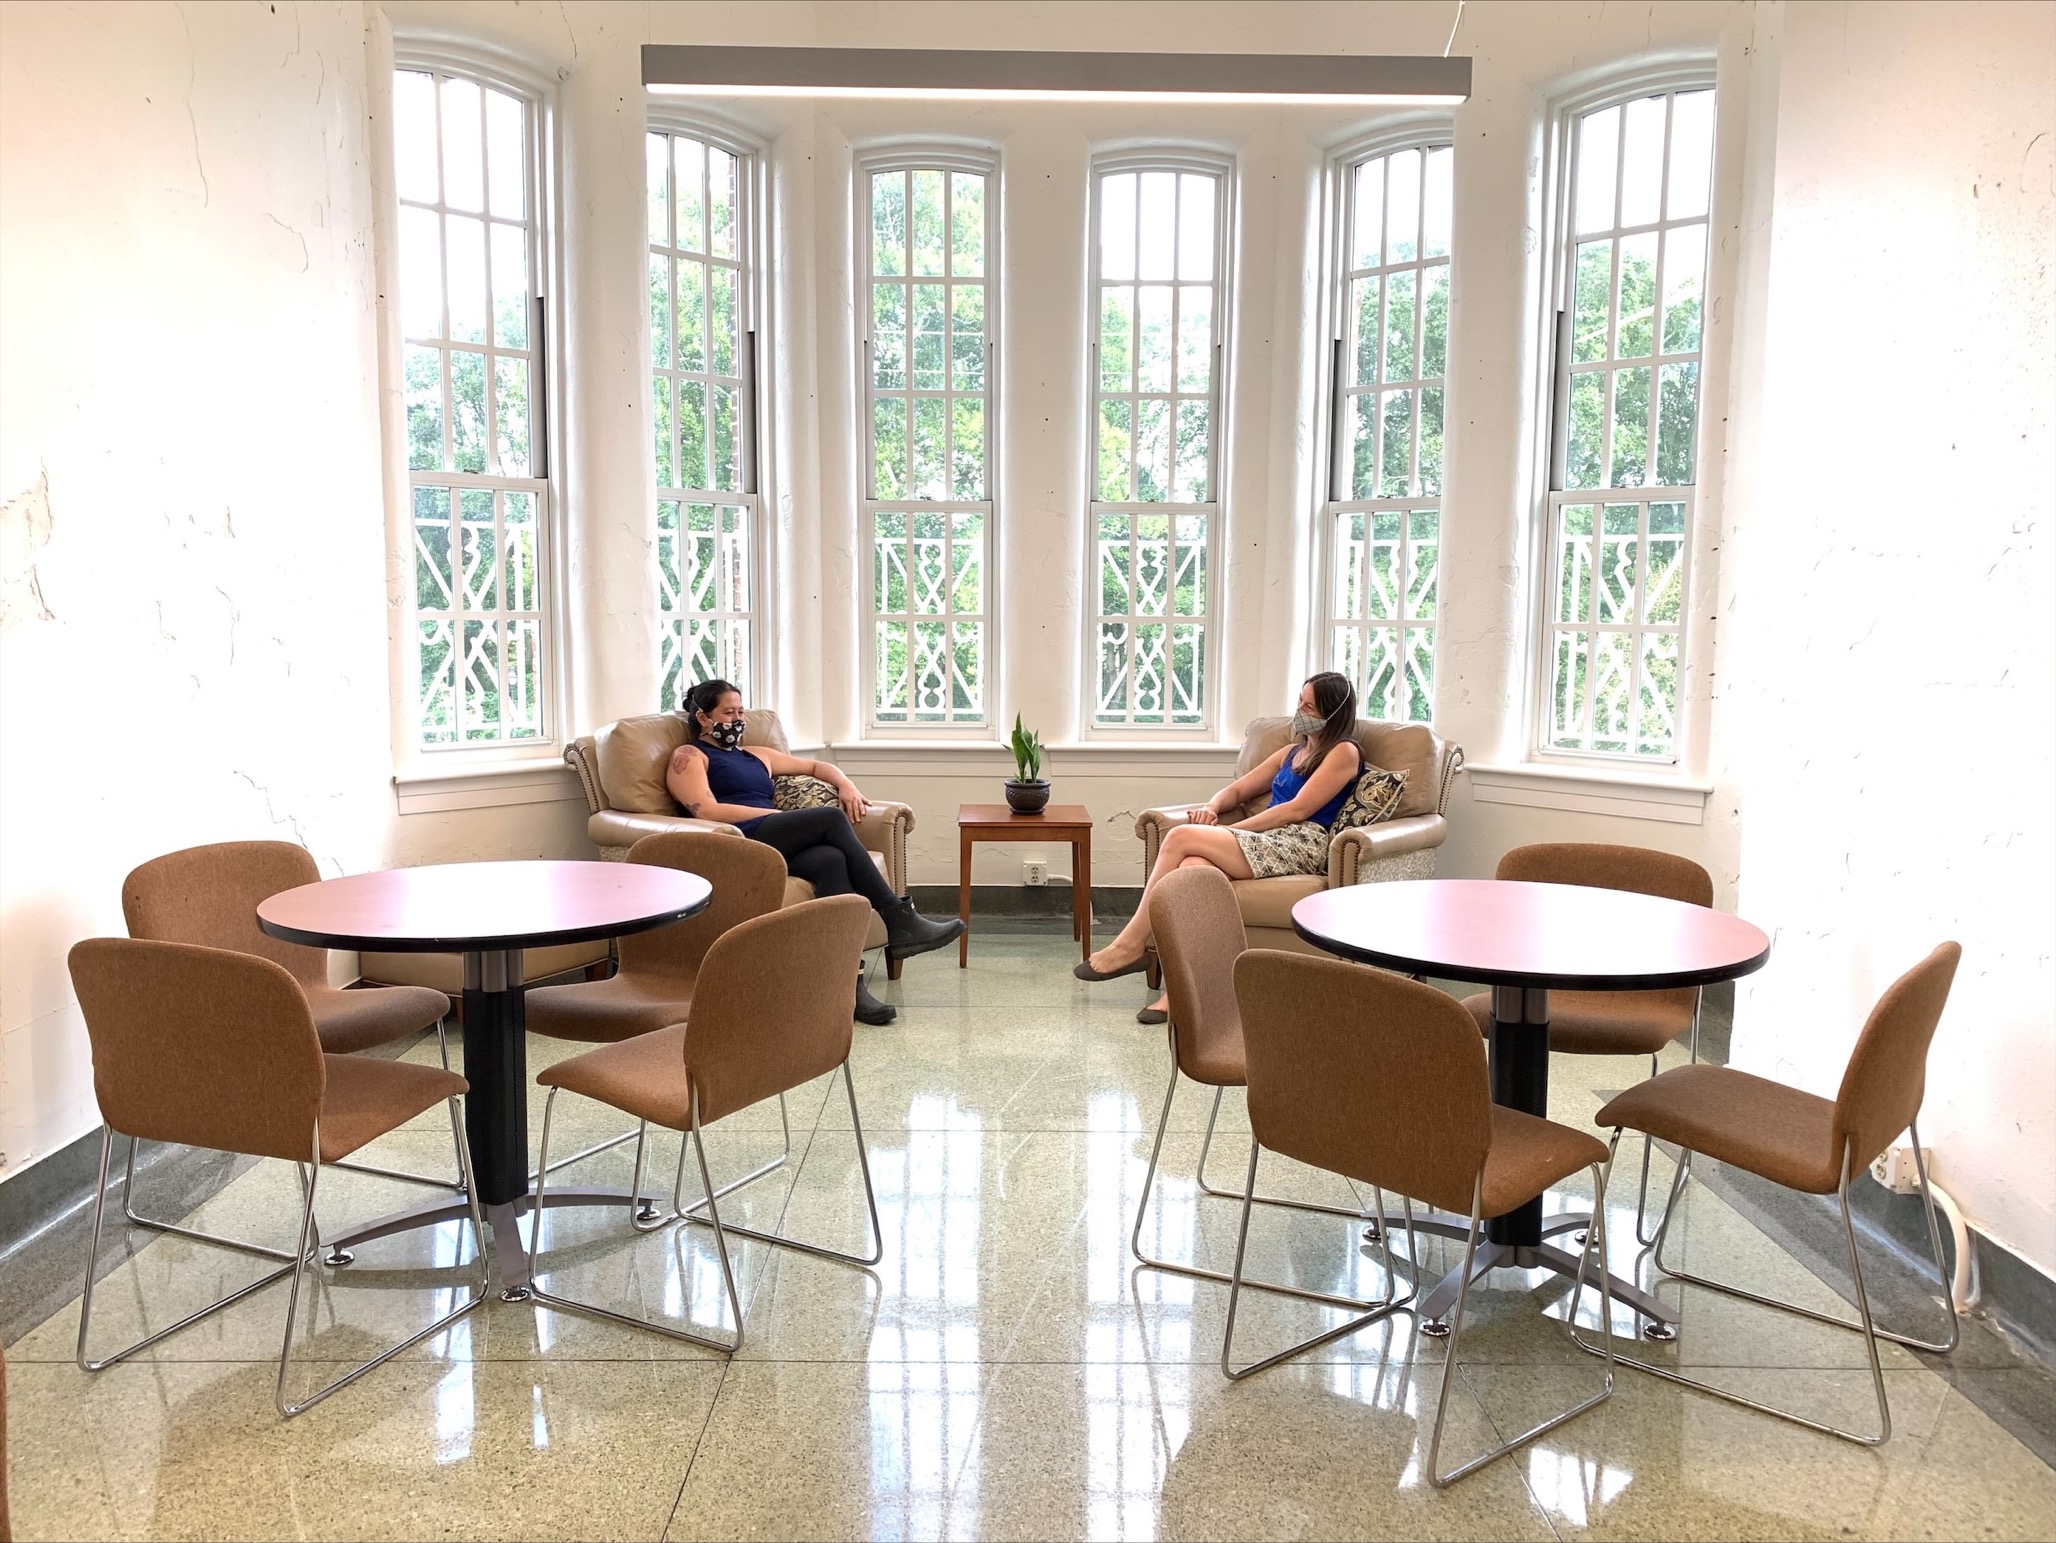 Two women sit in armchairs by windows, with two empty tables in front of them, each with four chairs